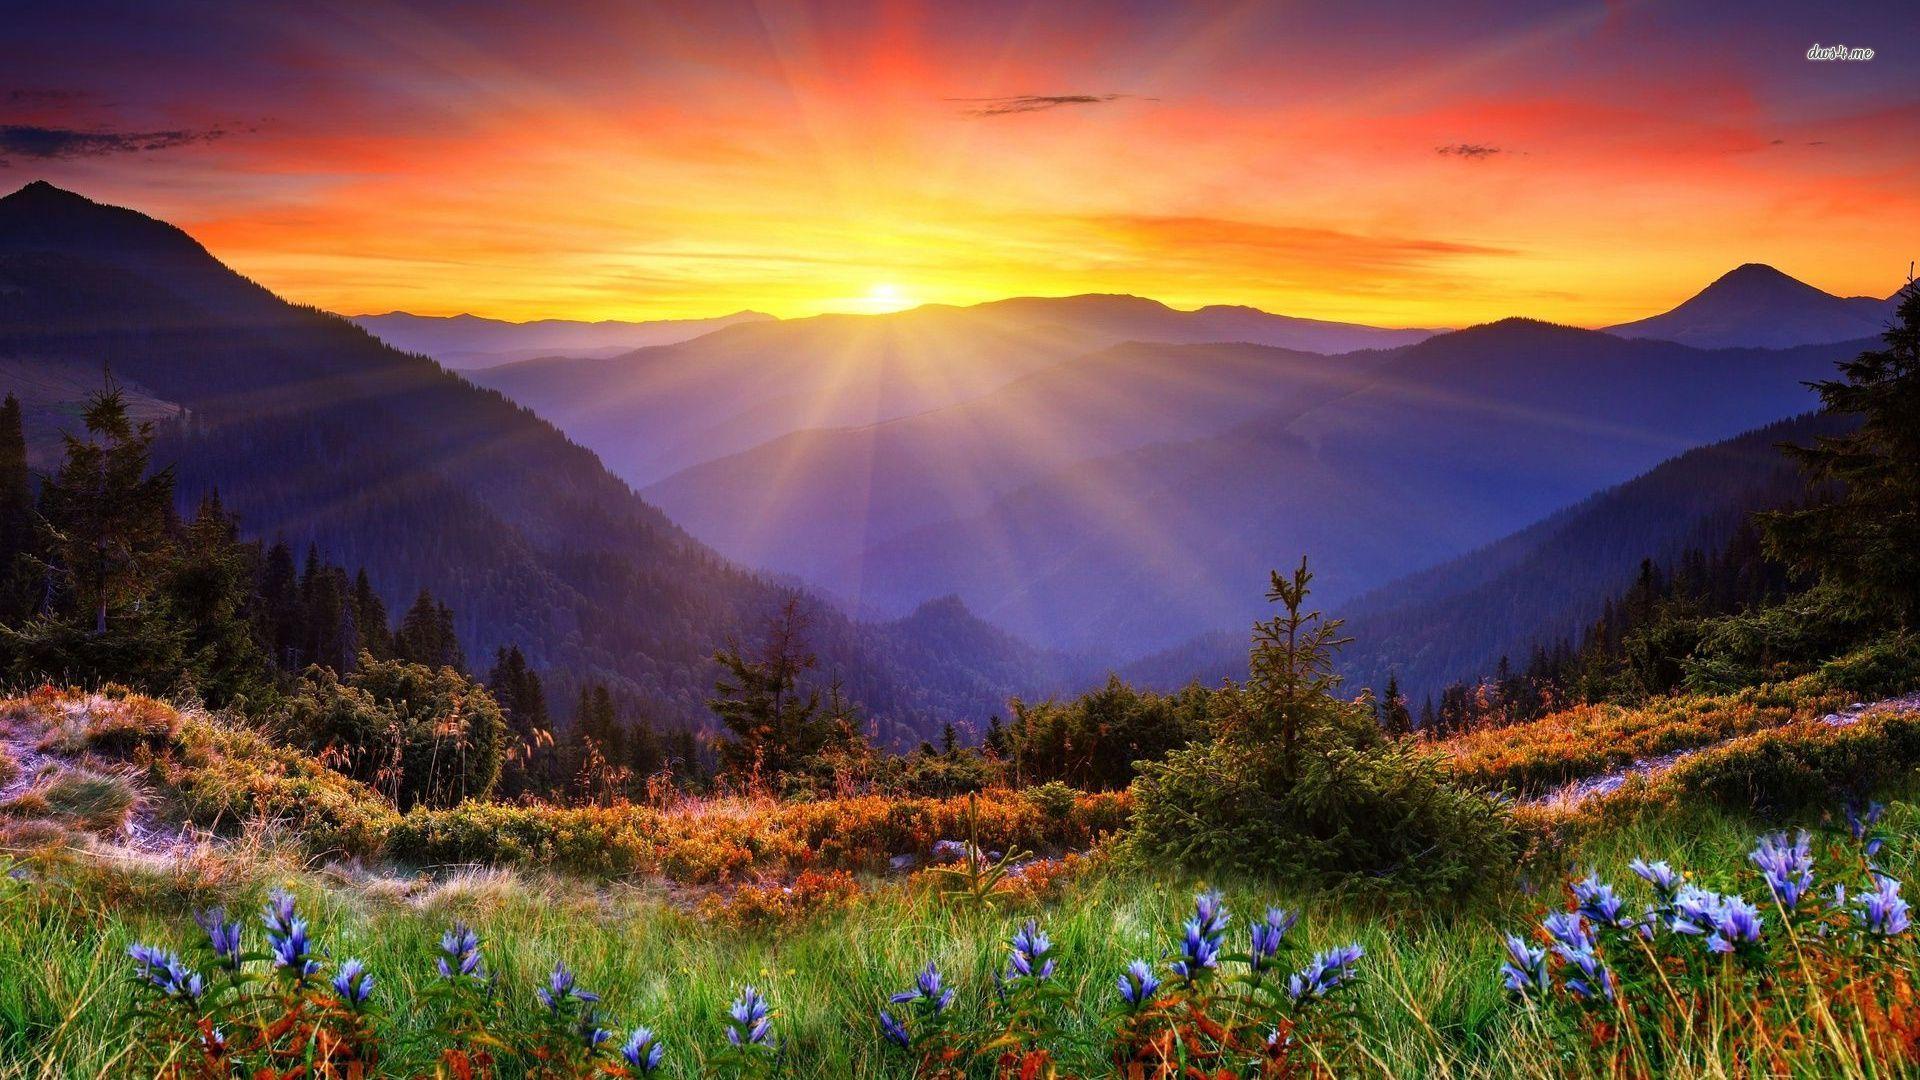 Sunrise Over The Mountains Wallpapers - Wallpaper Cave